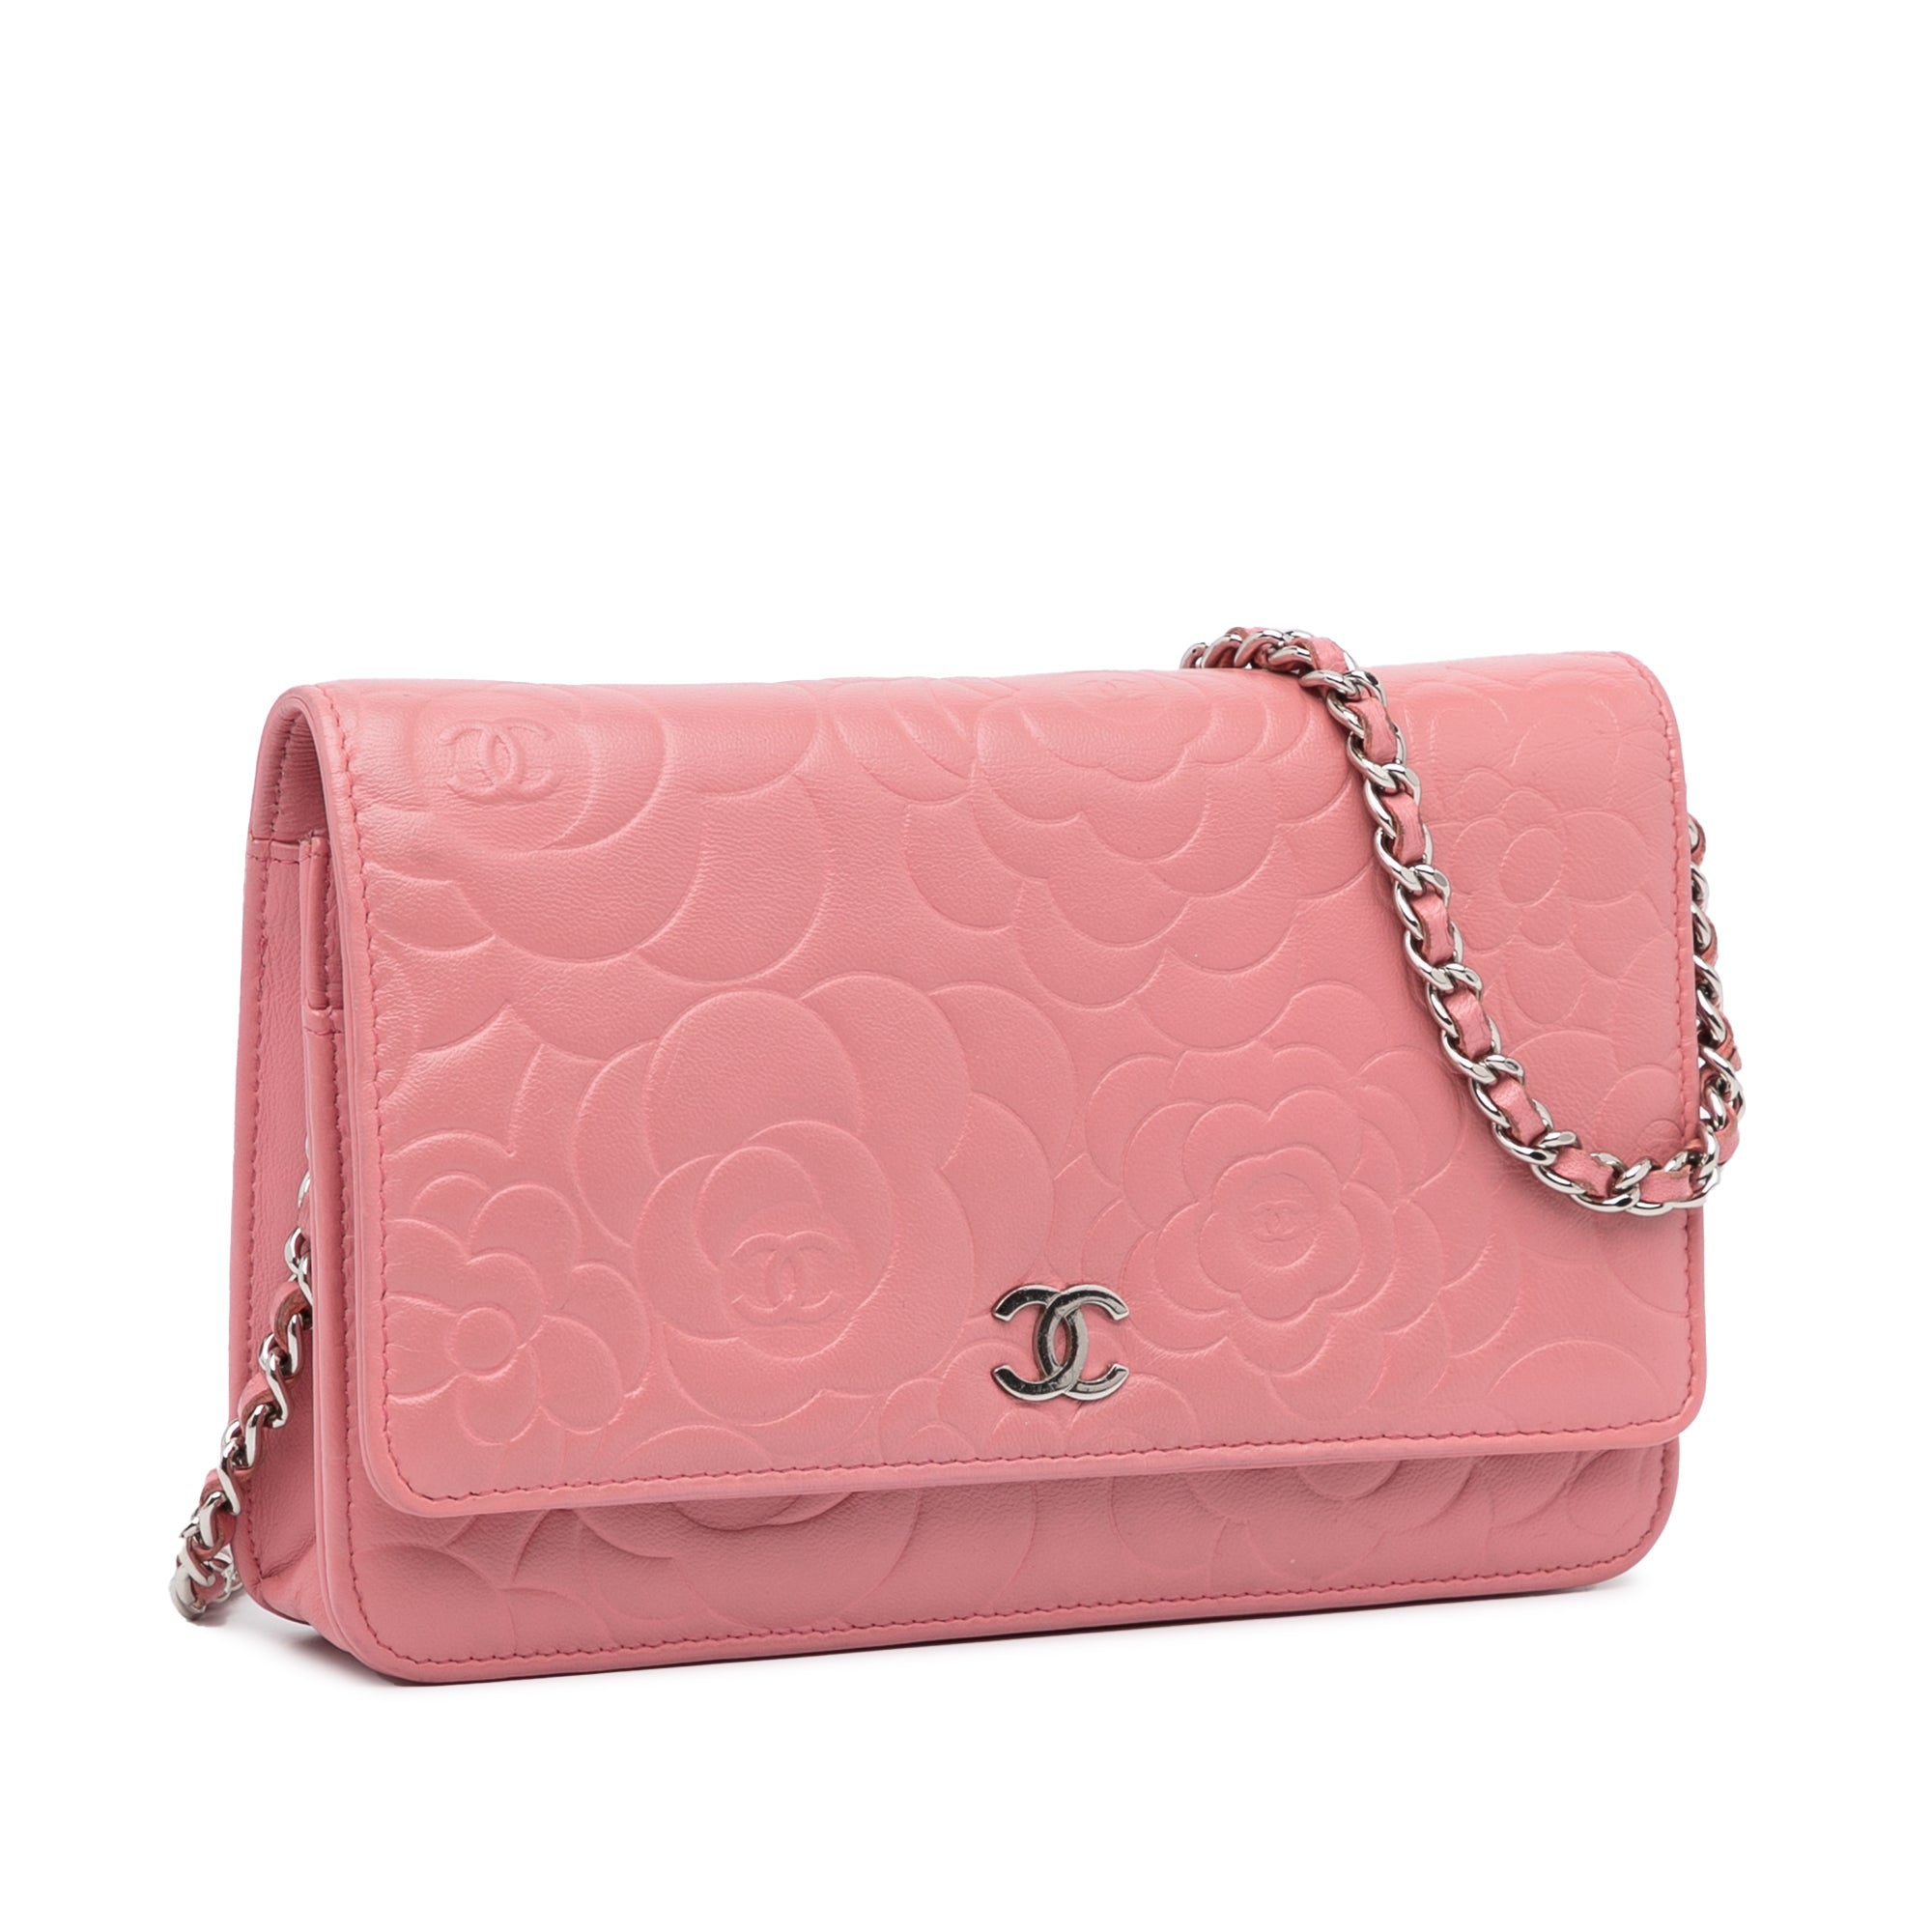 Chanel Key Holder Case Key Pouch Camellia Key Ring Coin Purse Pink Lambskin  Auth